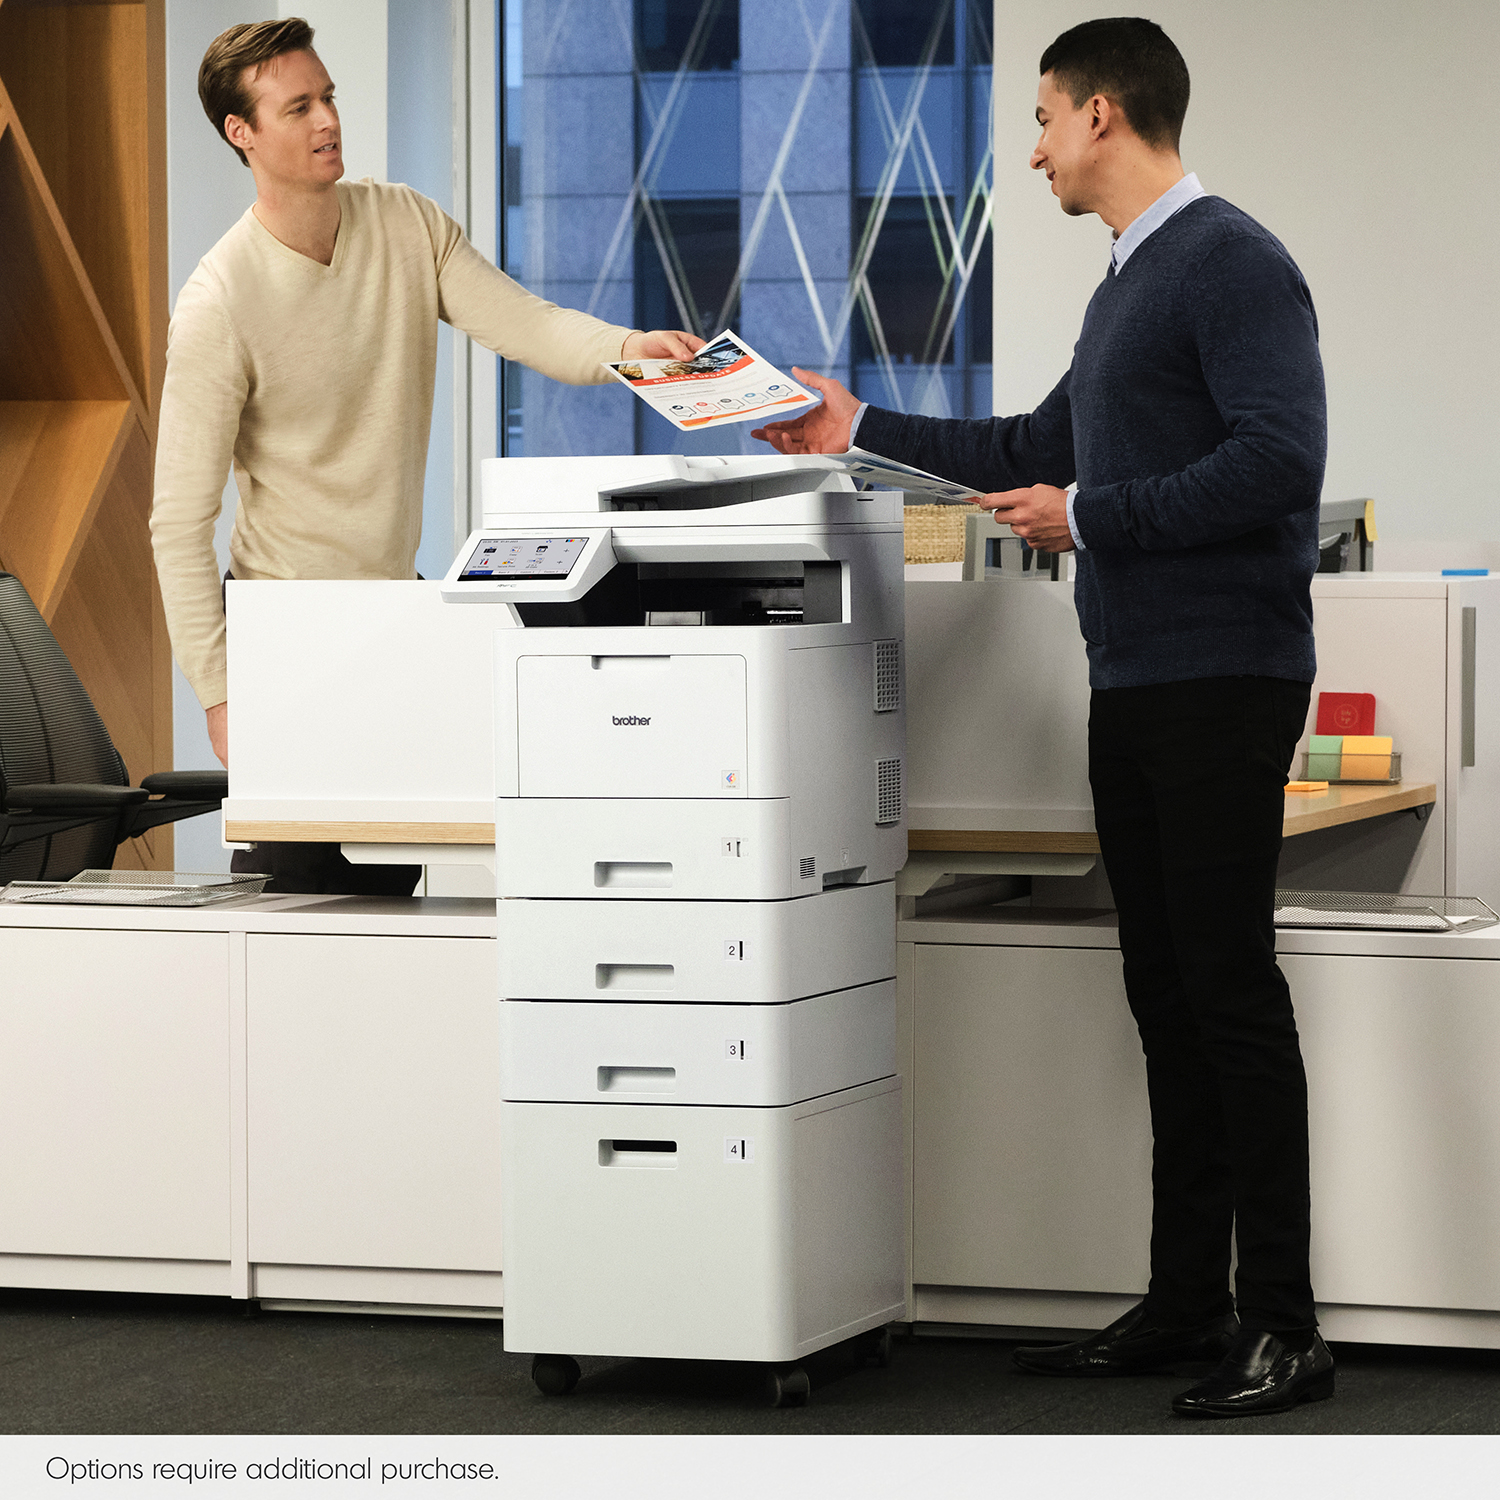 Enterprise Color Laser All-in-One Printer for Mid to Large Sized Workgroups